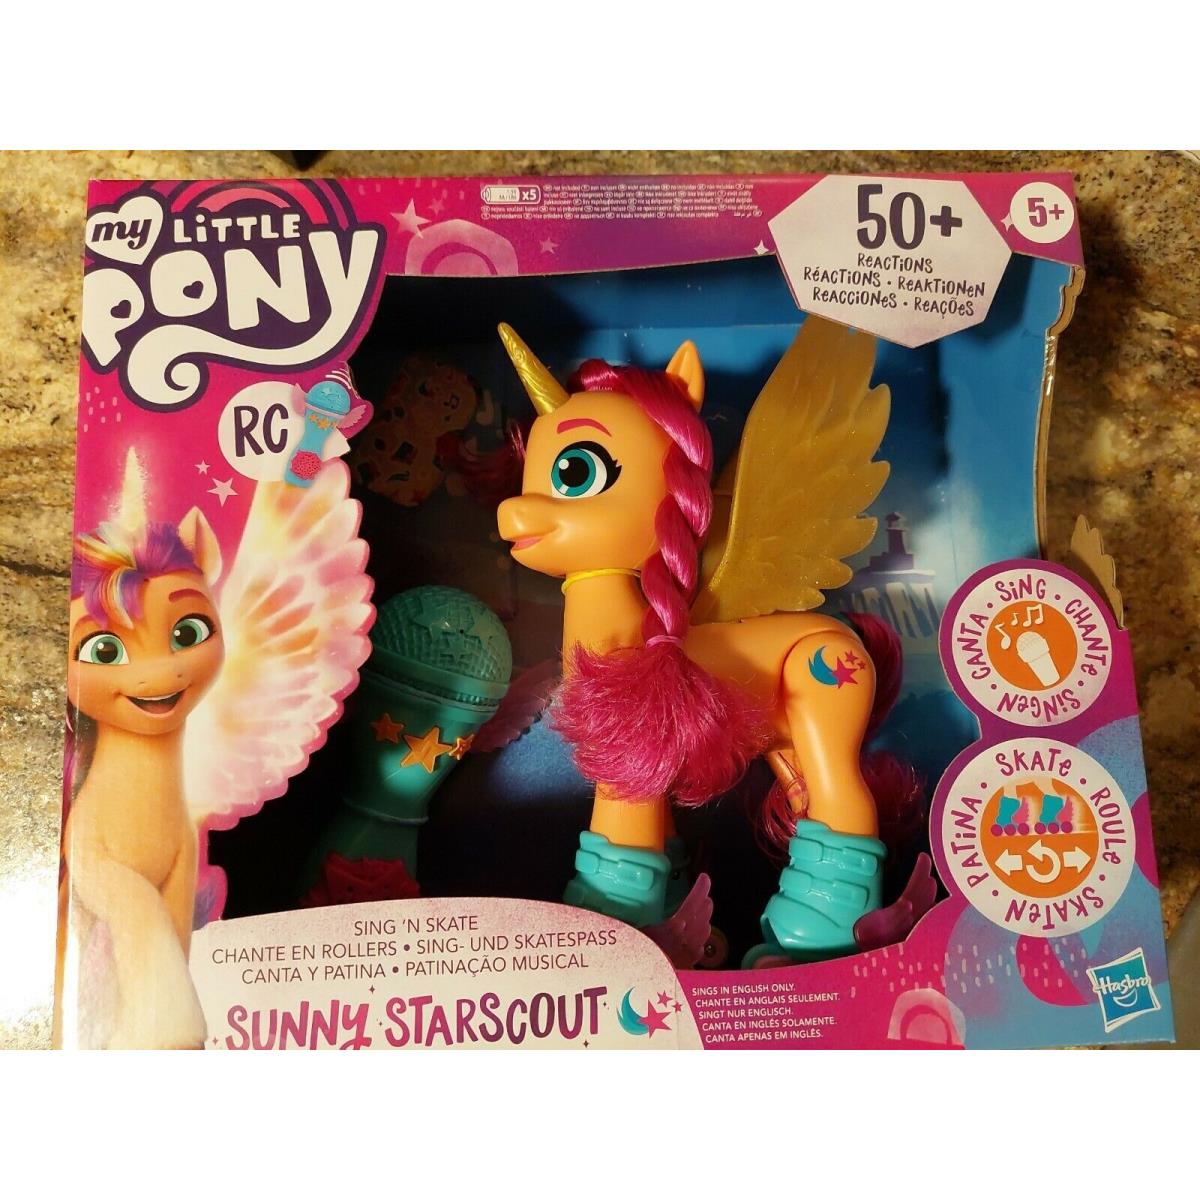 My Little Pony: A Generation Sing `N Skate Sunny Starscout 50+ Reactions